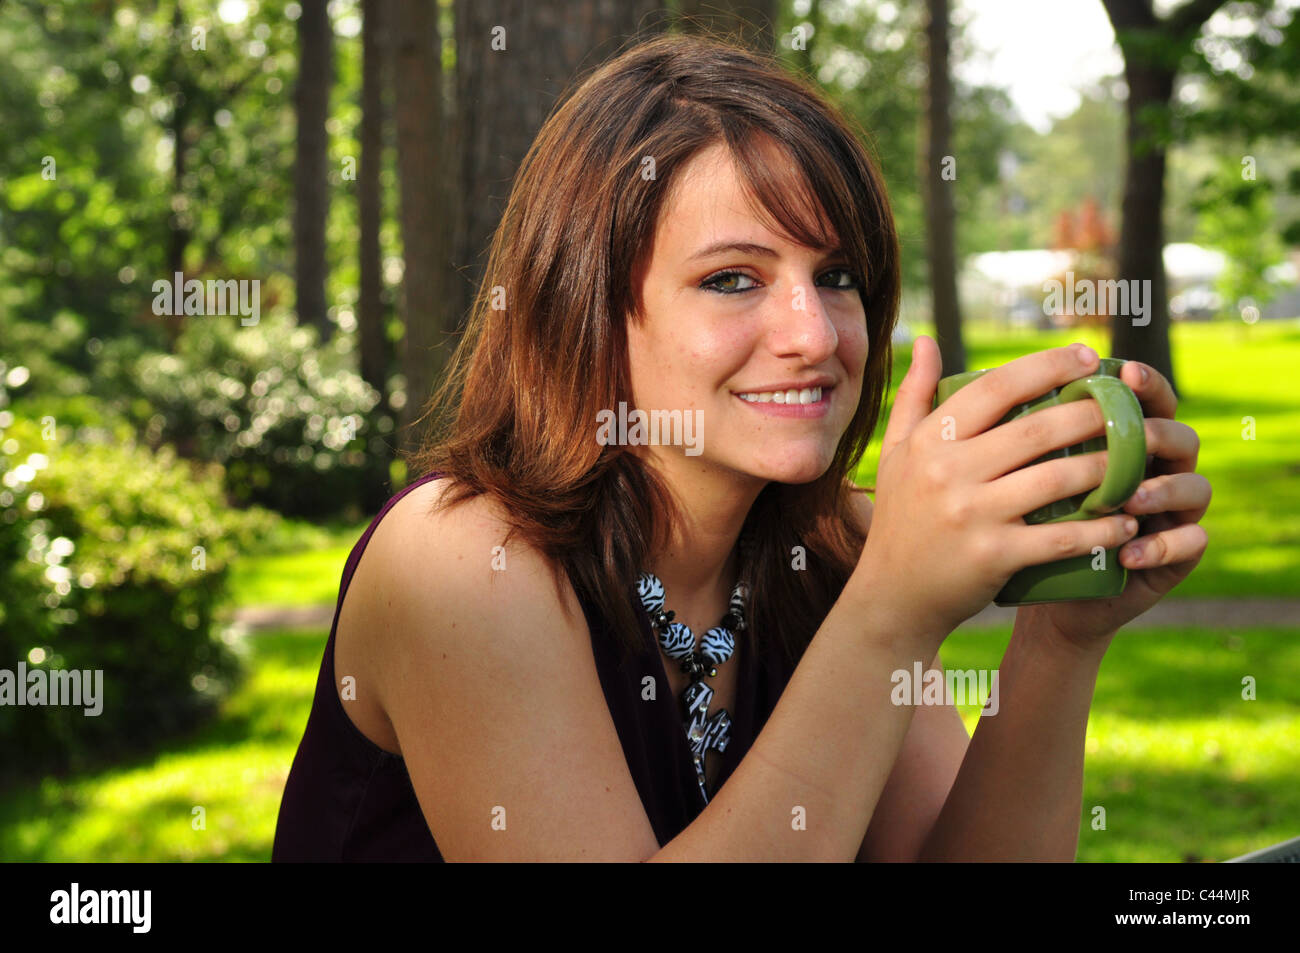 A pretty girl is sitting outdoors holding a coffee mug Stock Photo